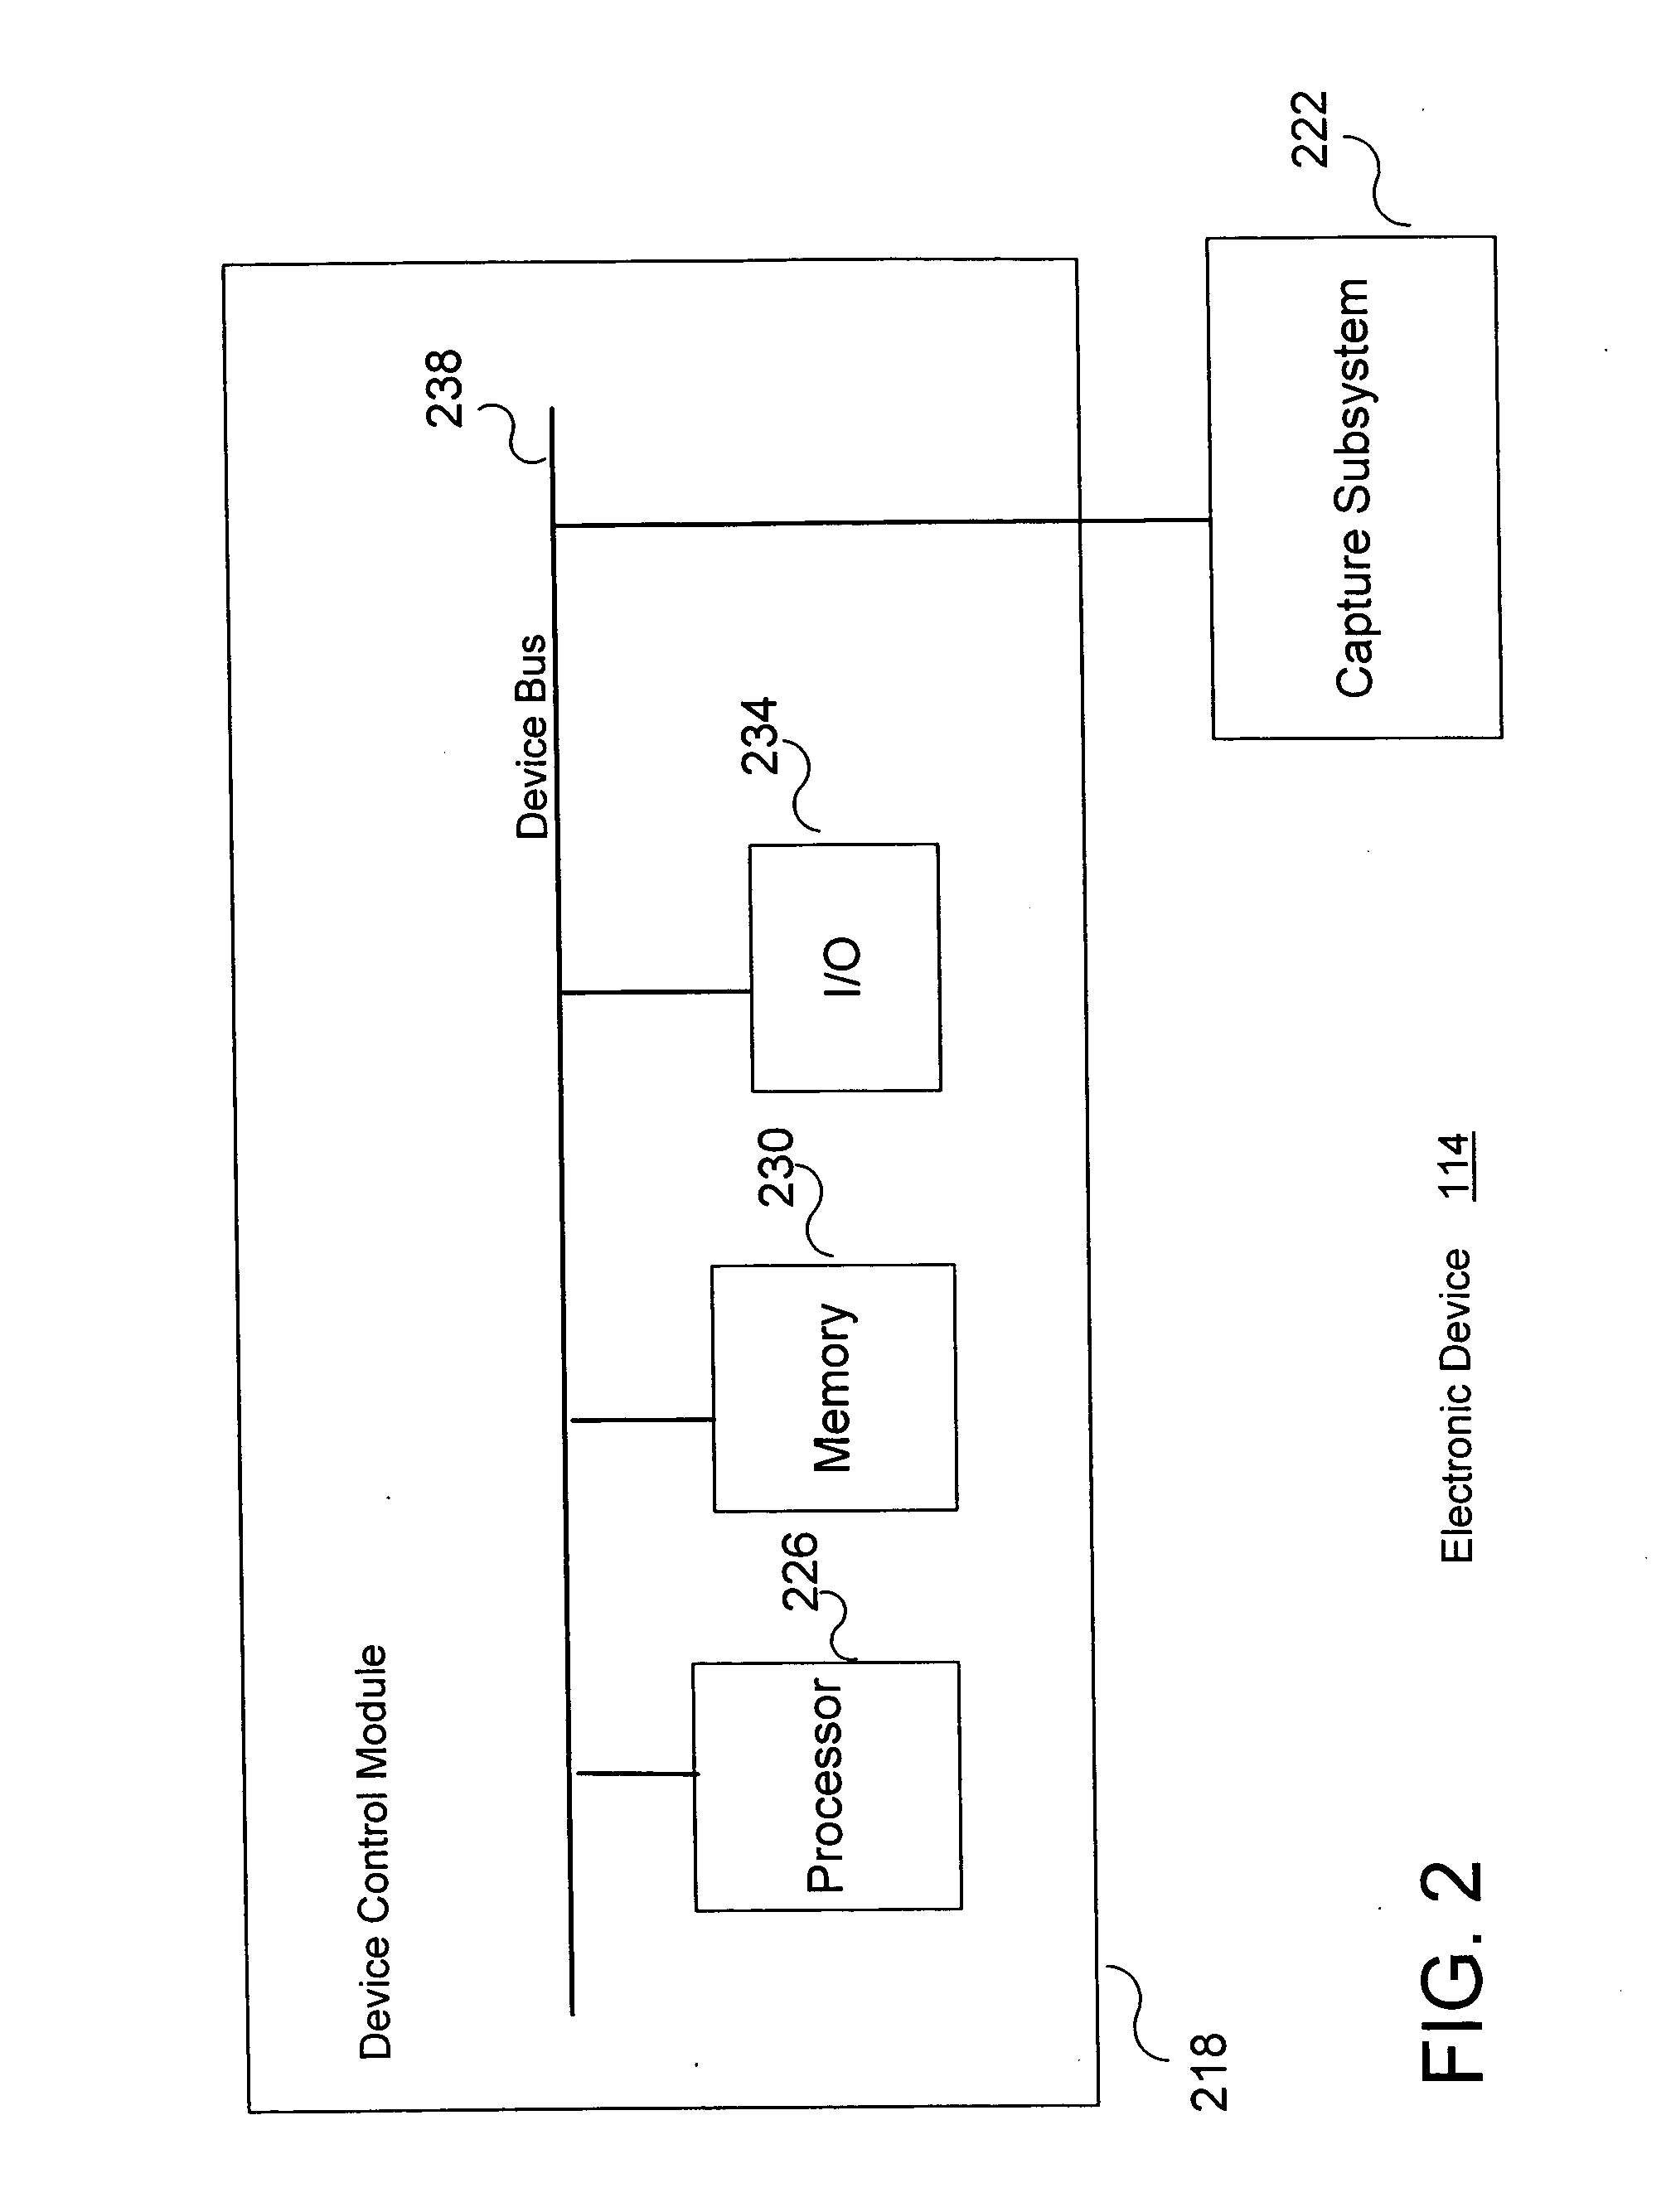 System and method for efficiently implementing a battery controller for an electronic device